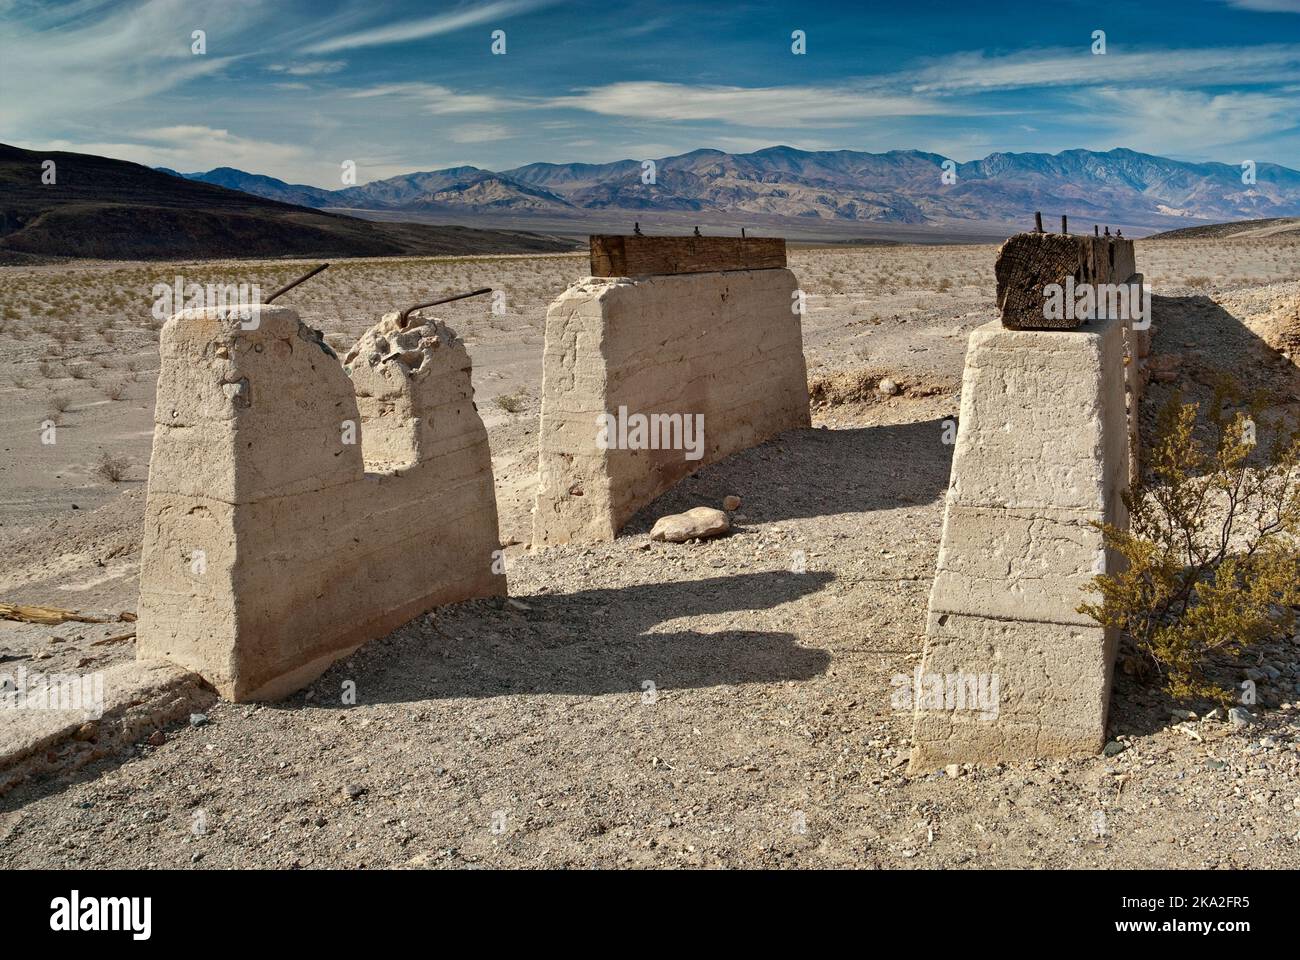 Ashford Mill ruins with Panamint Range in distance, Mojave Desert, Death Valley National Park, California, USA Stock Photo